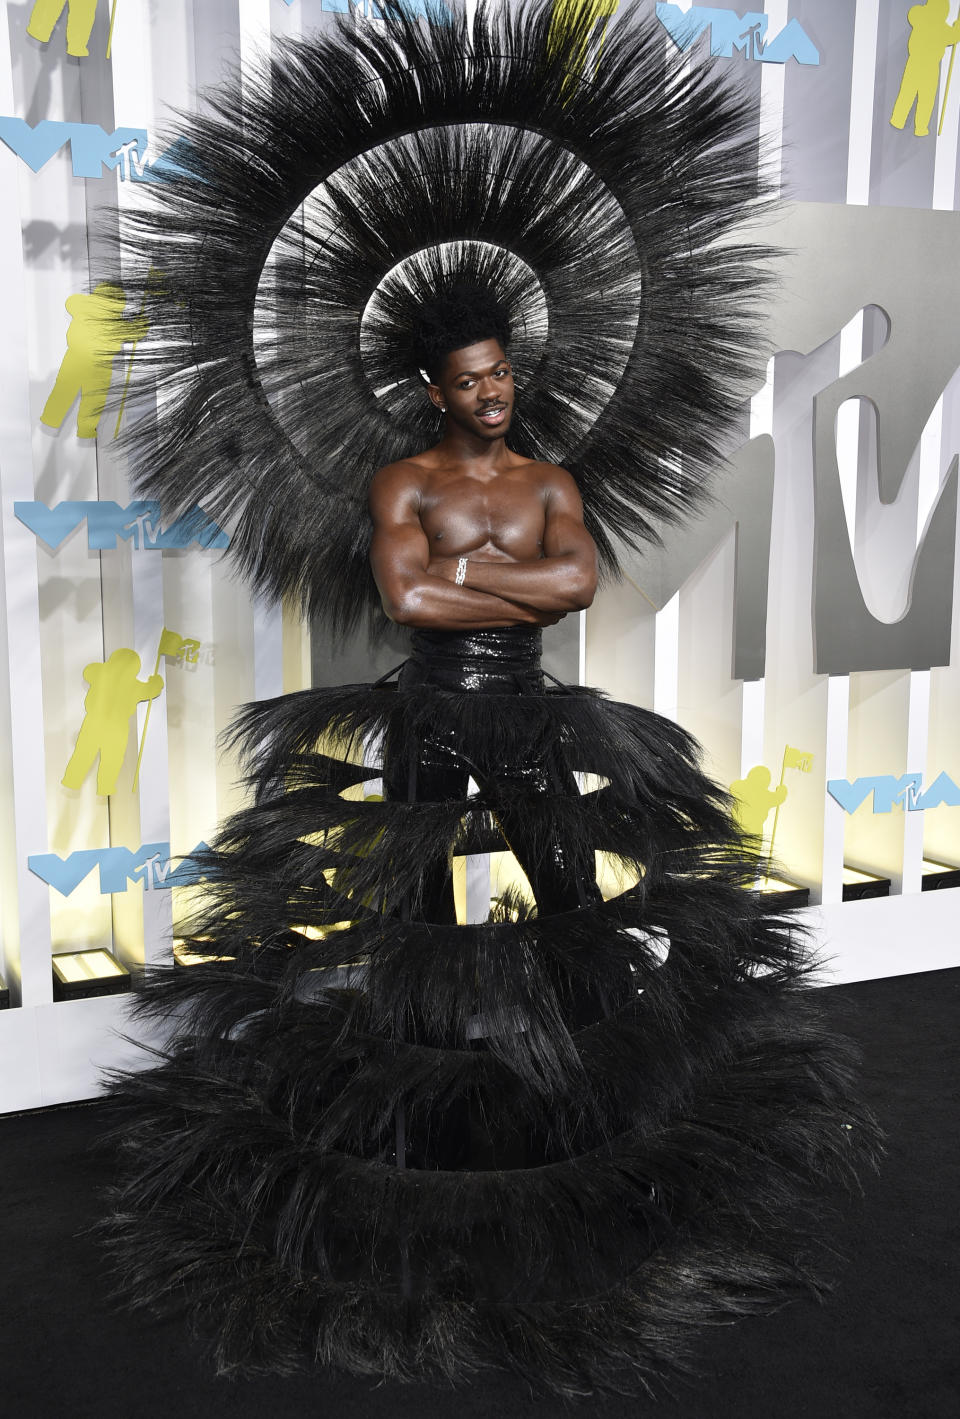 Lil Nas X arrives at the MTV Video Music Awards at the Prudential Center on Sunday, Aug. 28, 2022, in Newark, N.J. (Photo by Evan Agostini/Invision/AP)